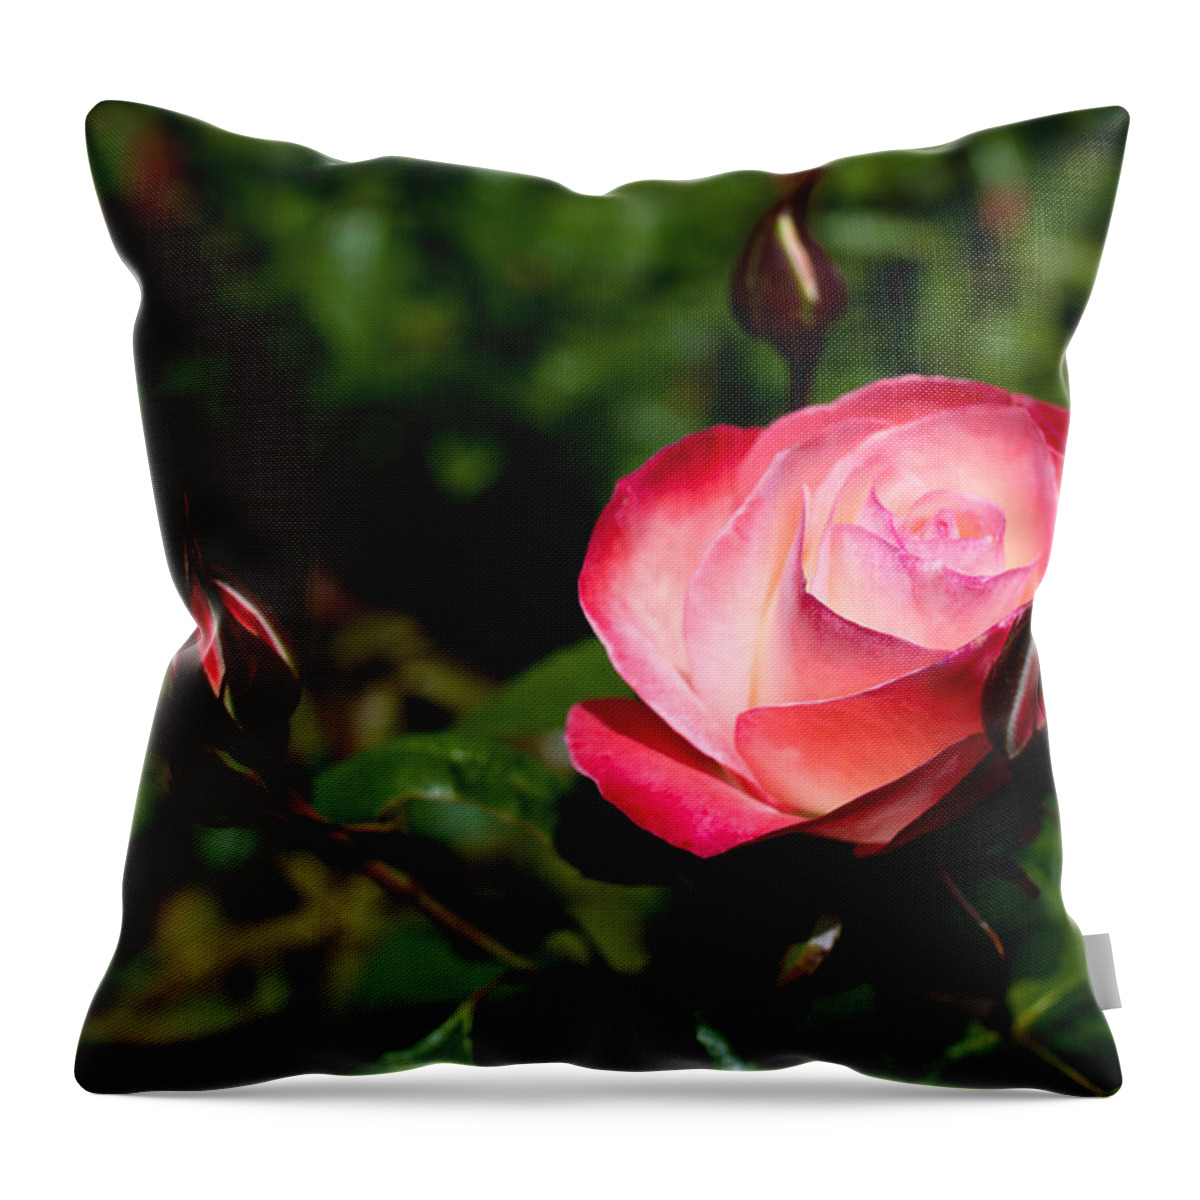 Flower Throw Pillow featuring the photograph Rose by Lora Lee Chapman